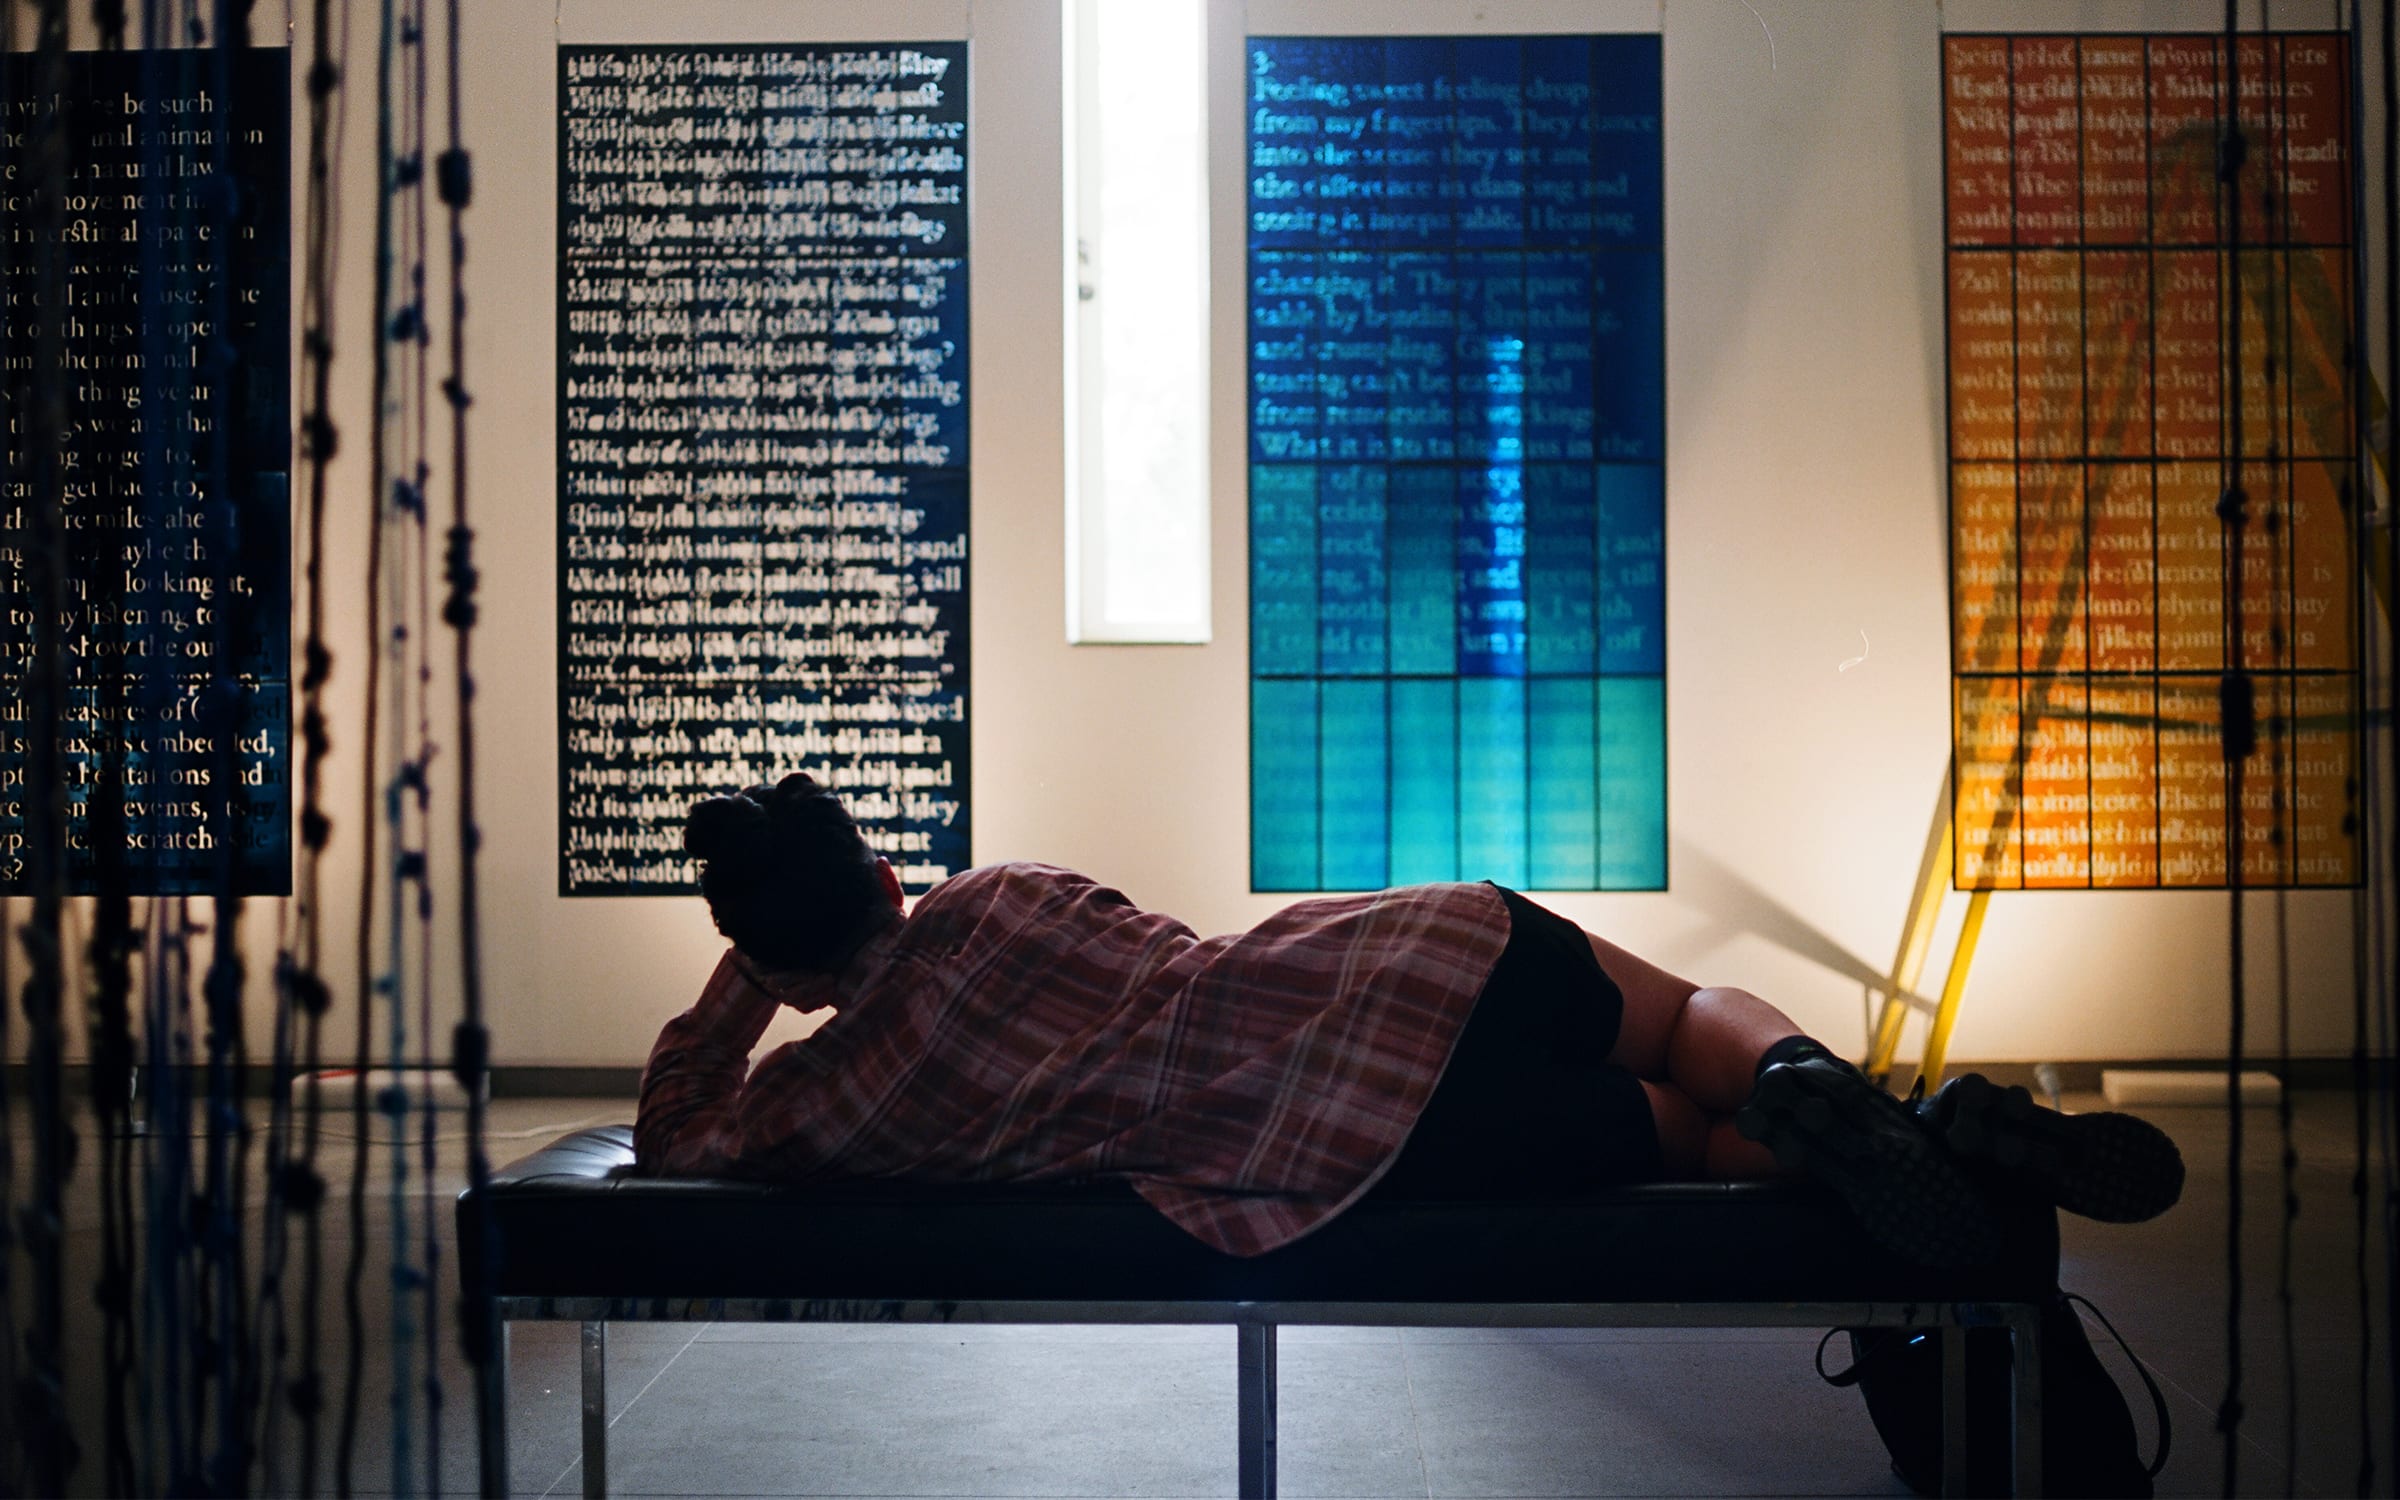 Wu Tsang, contemplating her own works in the studio. Photography by Tosh Basco for Art Basel.